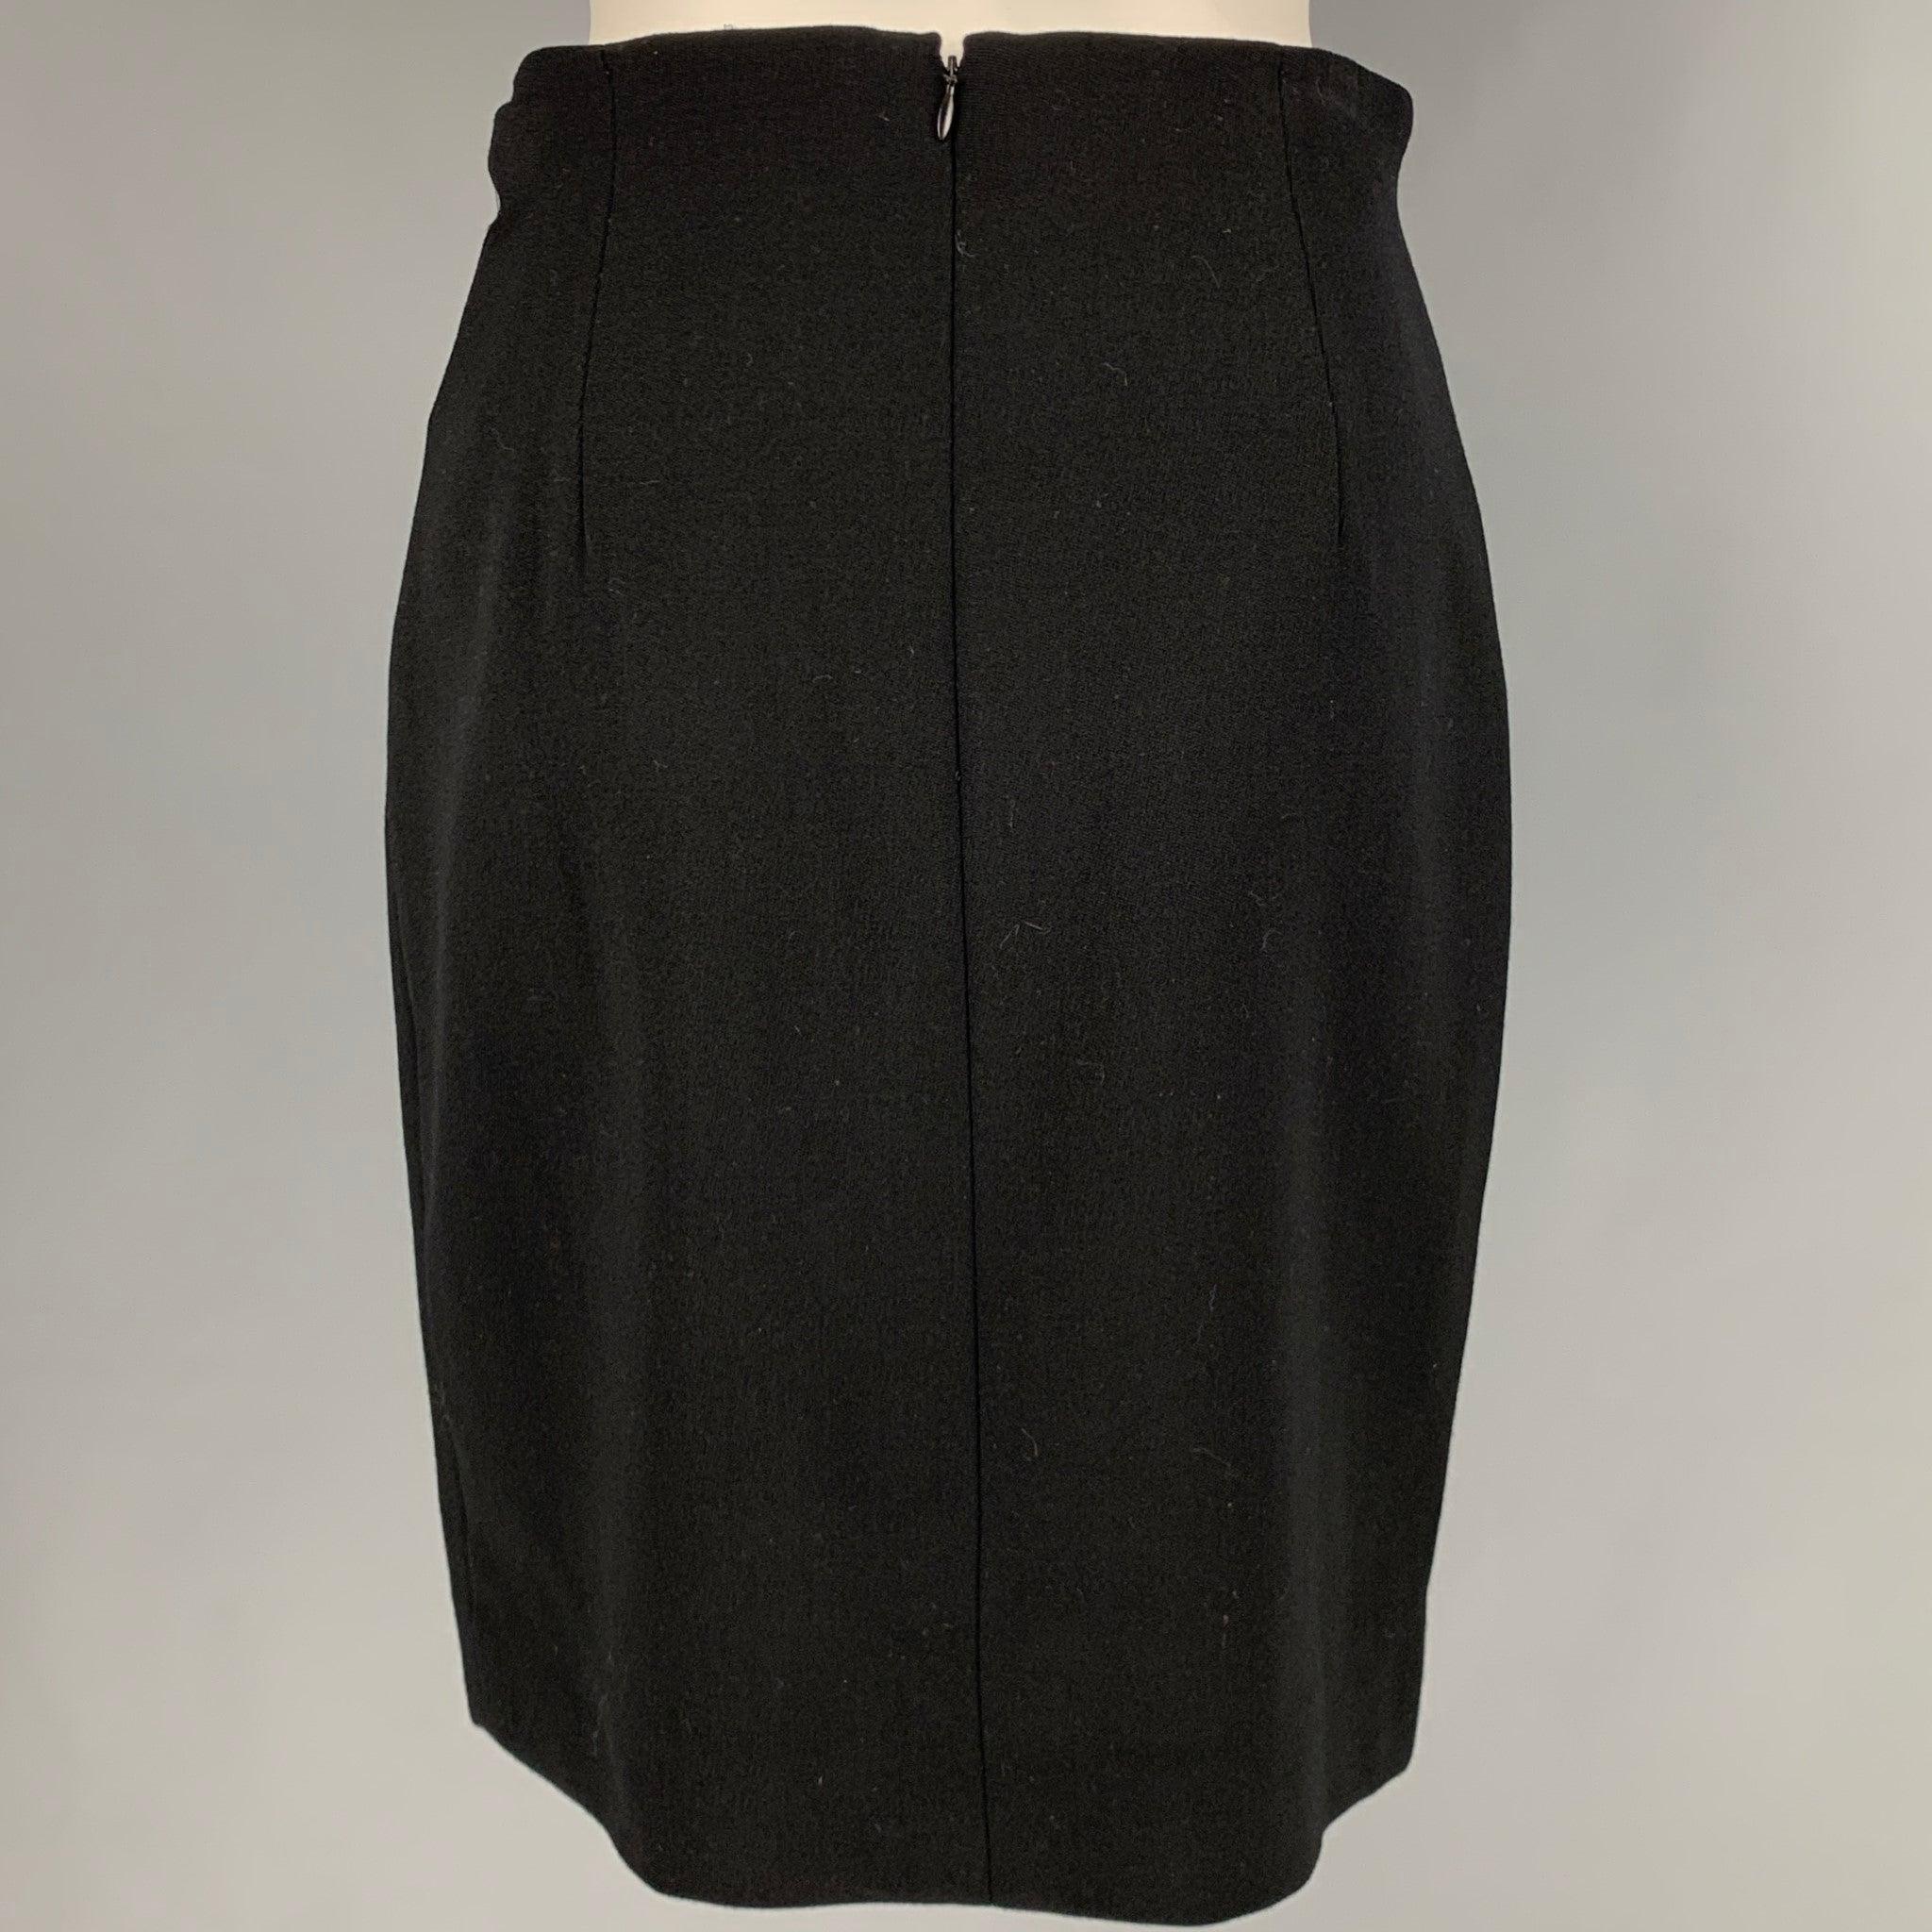 RALPH LAUREN skirt
in a
black wool fabric featuring a below knee length, pencil style, and back zipper closure. Made in USA.Excellent Pre-Owned Condition. 

Marked:   8 

Measurements: 
  Waist: 27.5 inches Hip: 35 inches Length: 20.5 inches 
  
  
